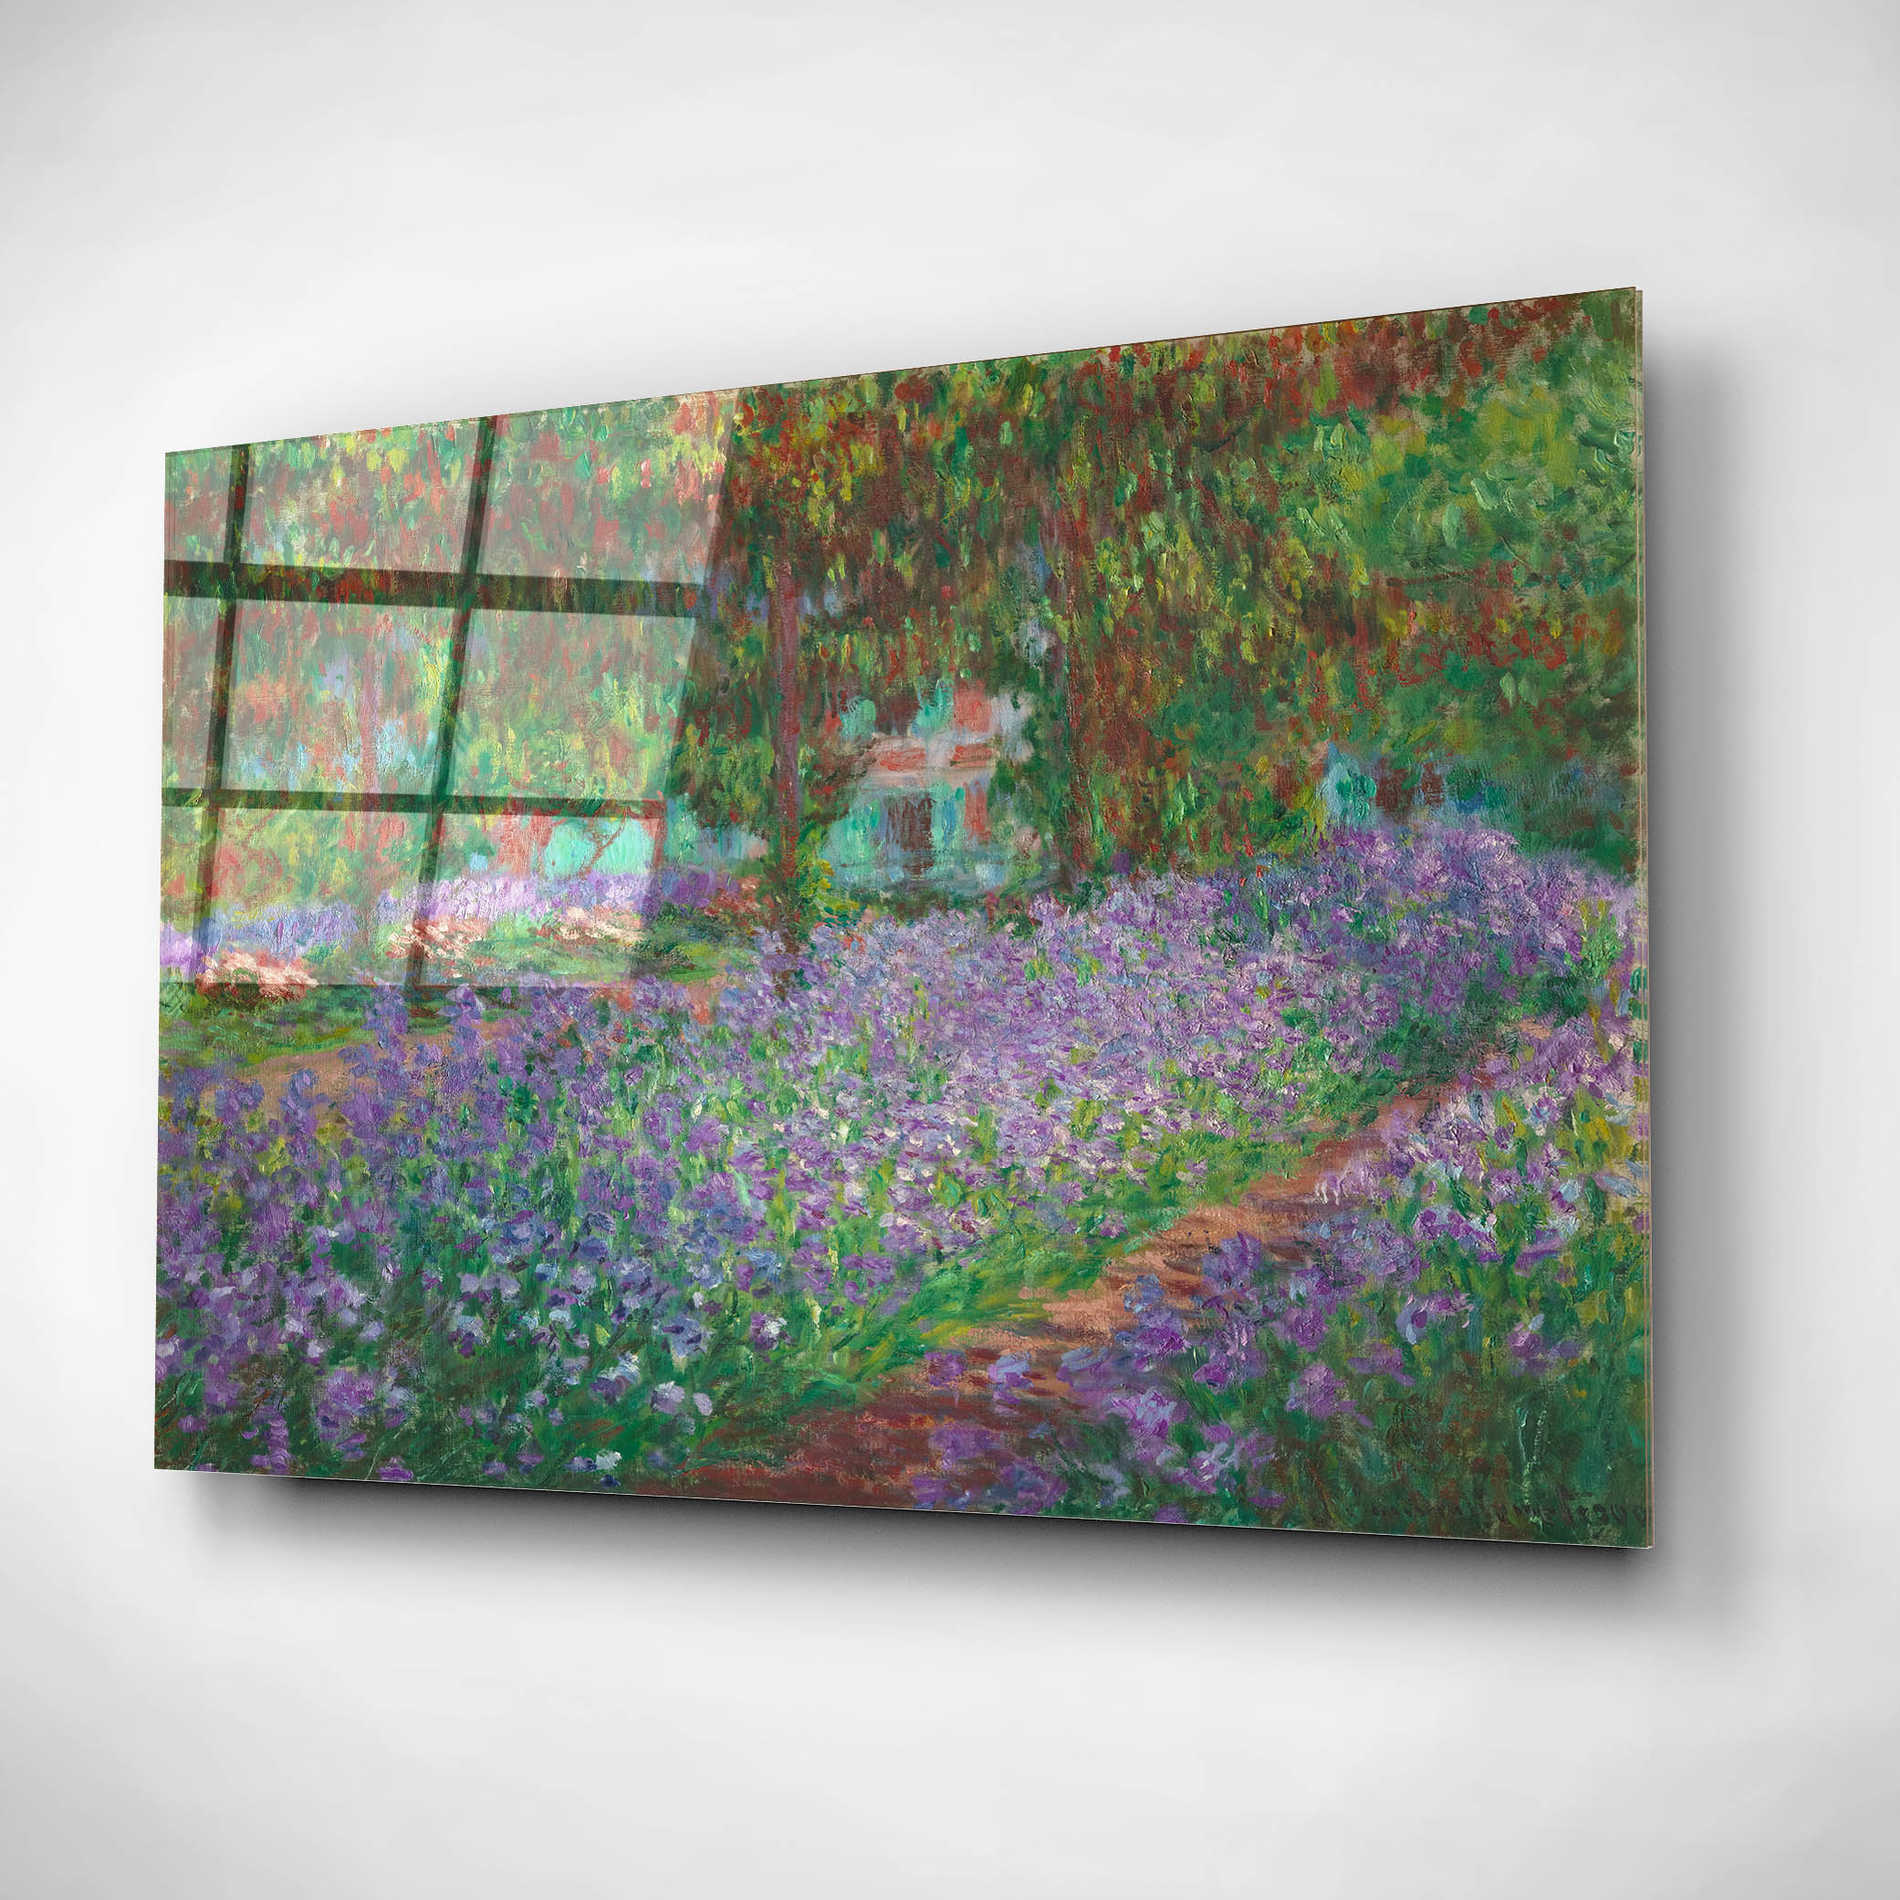 Epic Art 'The Artist's Garden at Giverny' by Claude Monet, Acrylic Glass Wall Art,24x16